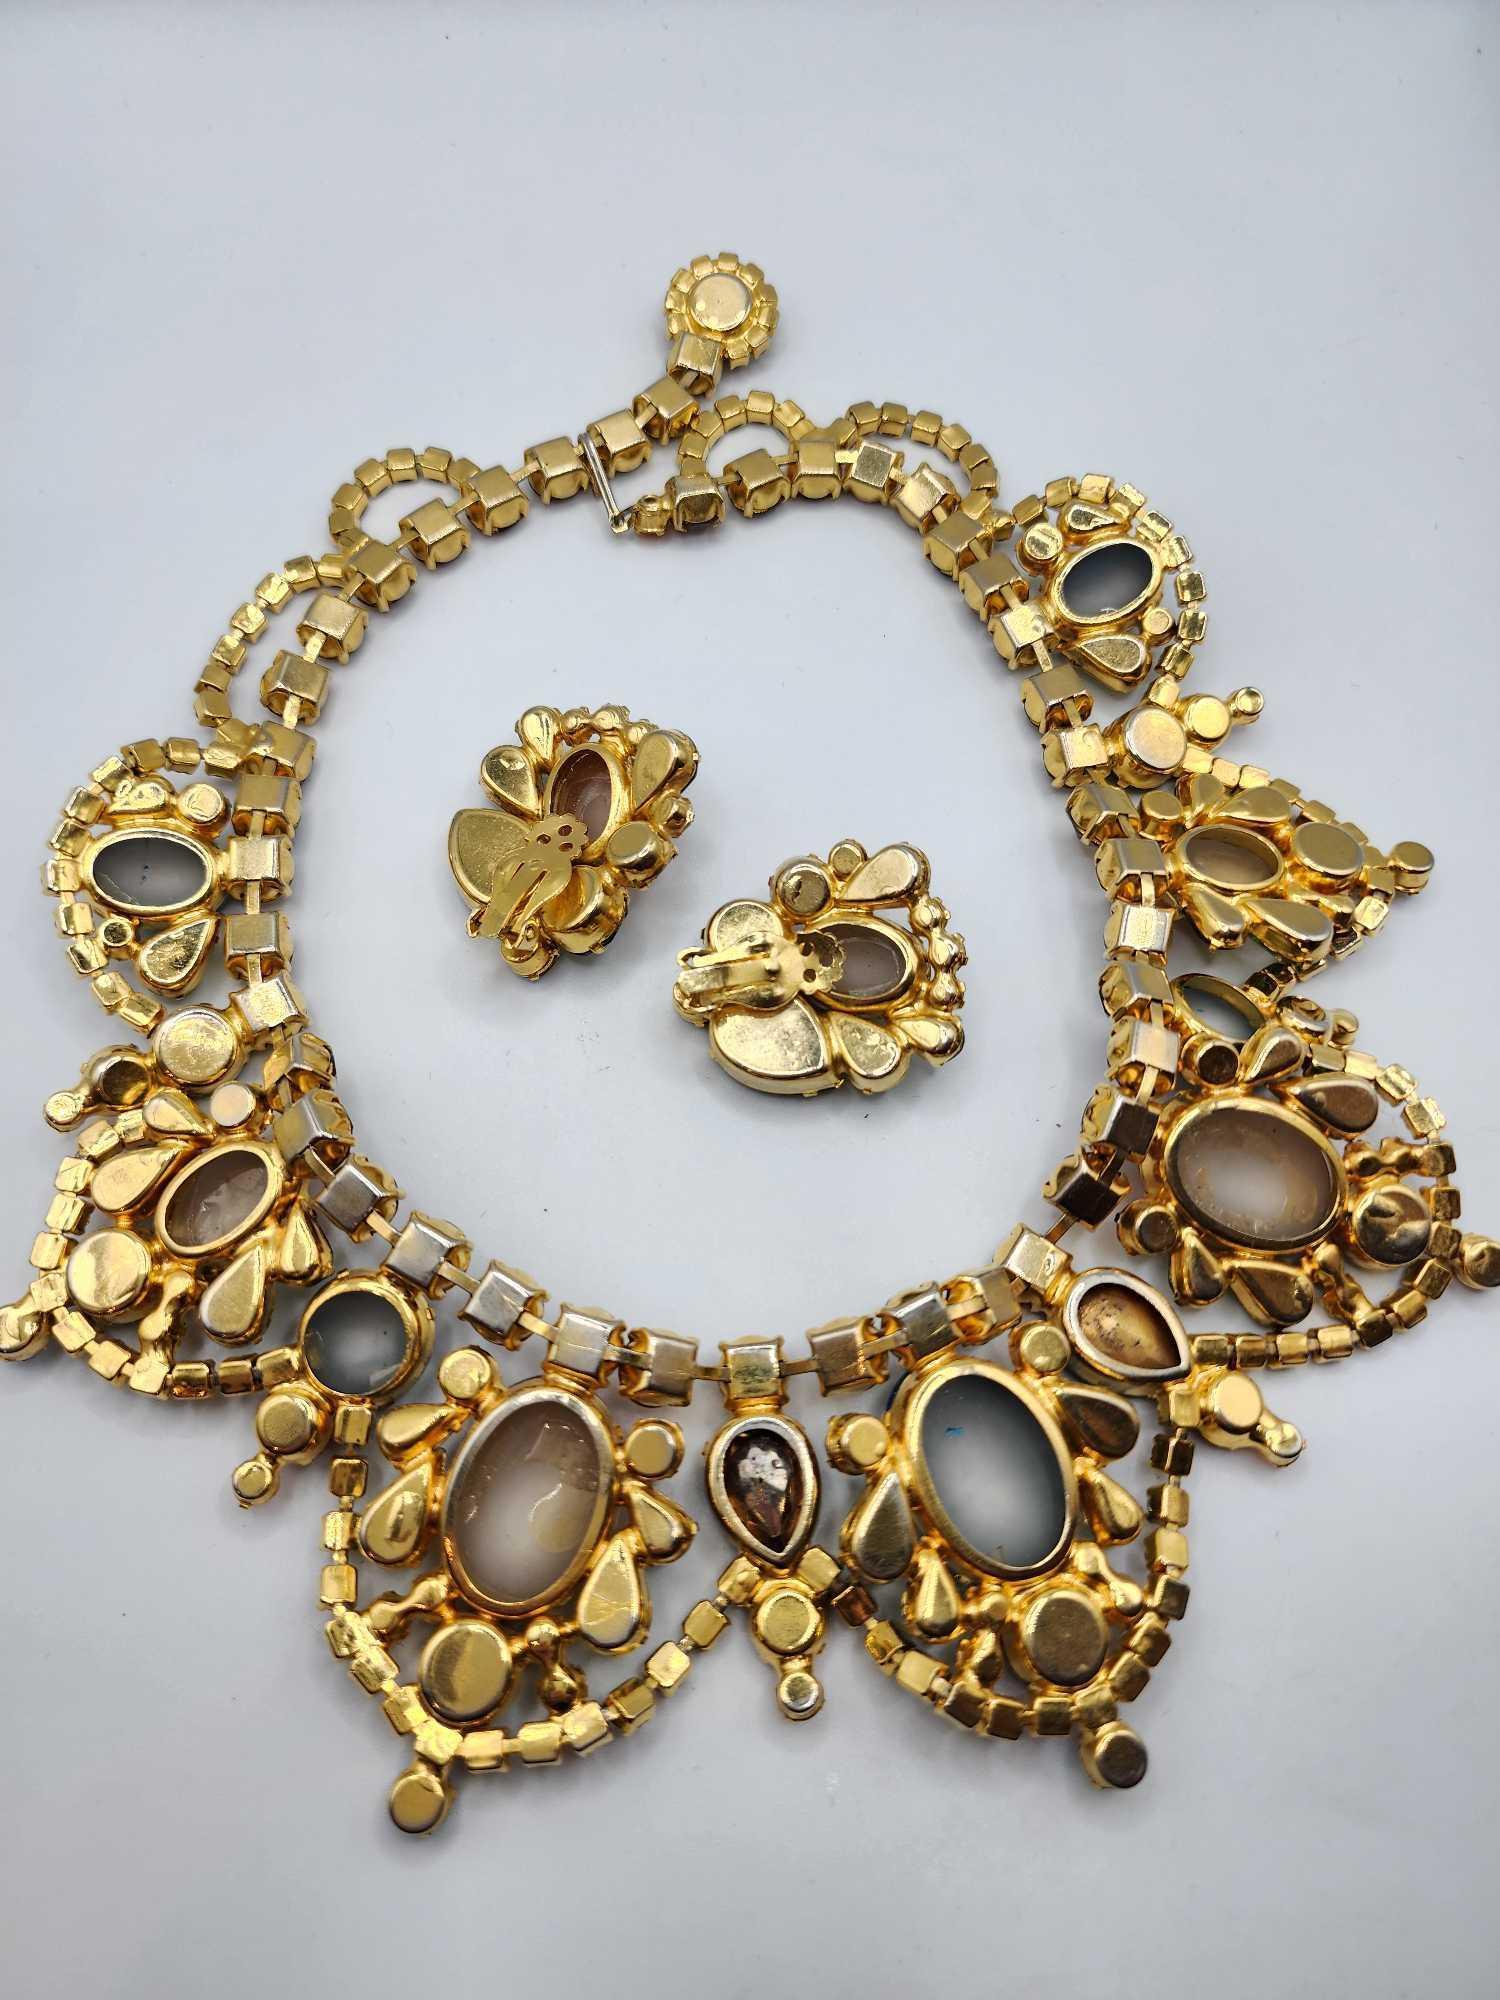 Gorgeous 1960s rhinestone necklace & earrings, attributed to Juliana